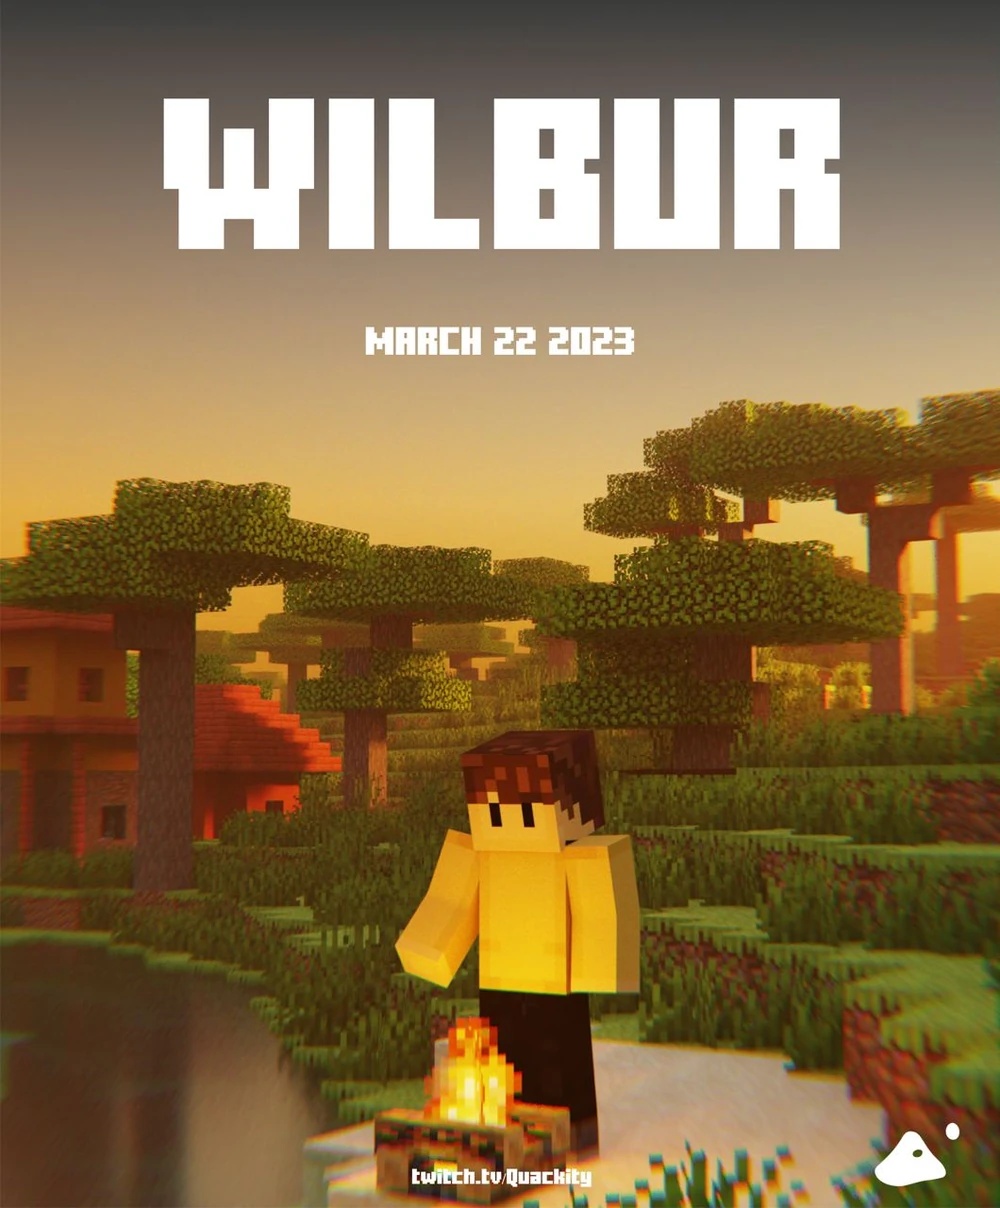 Official announcement poster for Wilbur. He stands at the edge of a lake or river, warming his hand by a campfire. In the background, there are some buildings made from jungle wood.